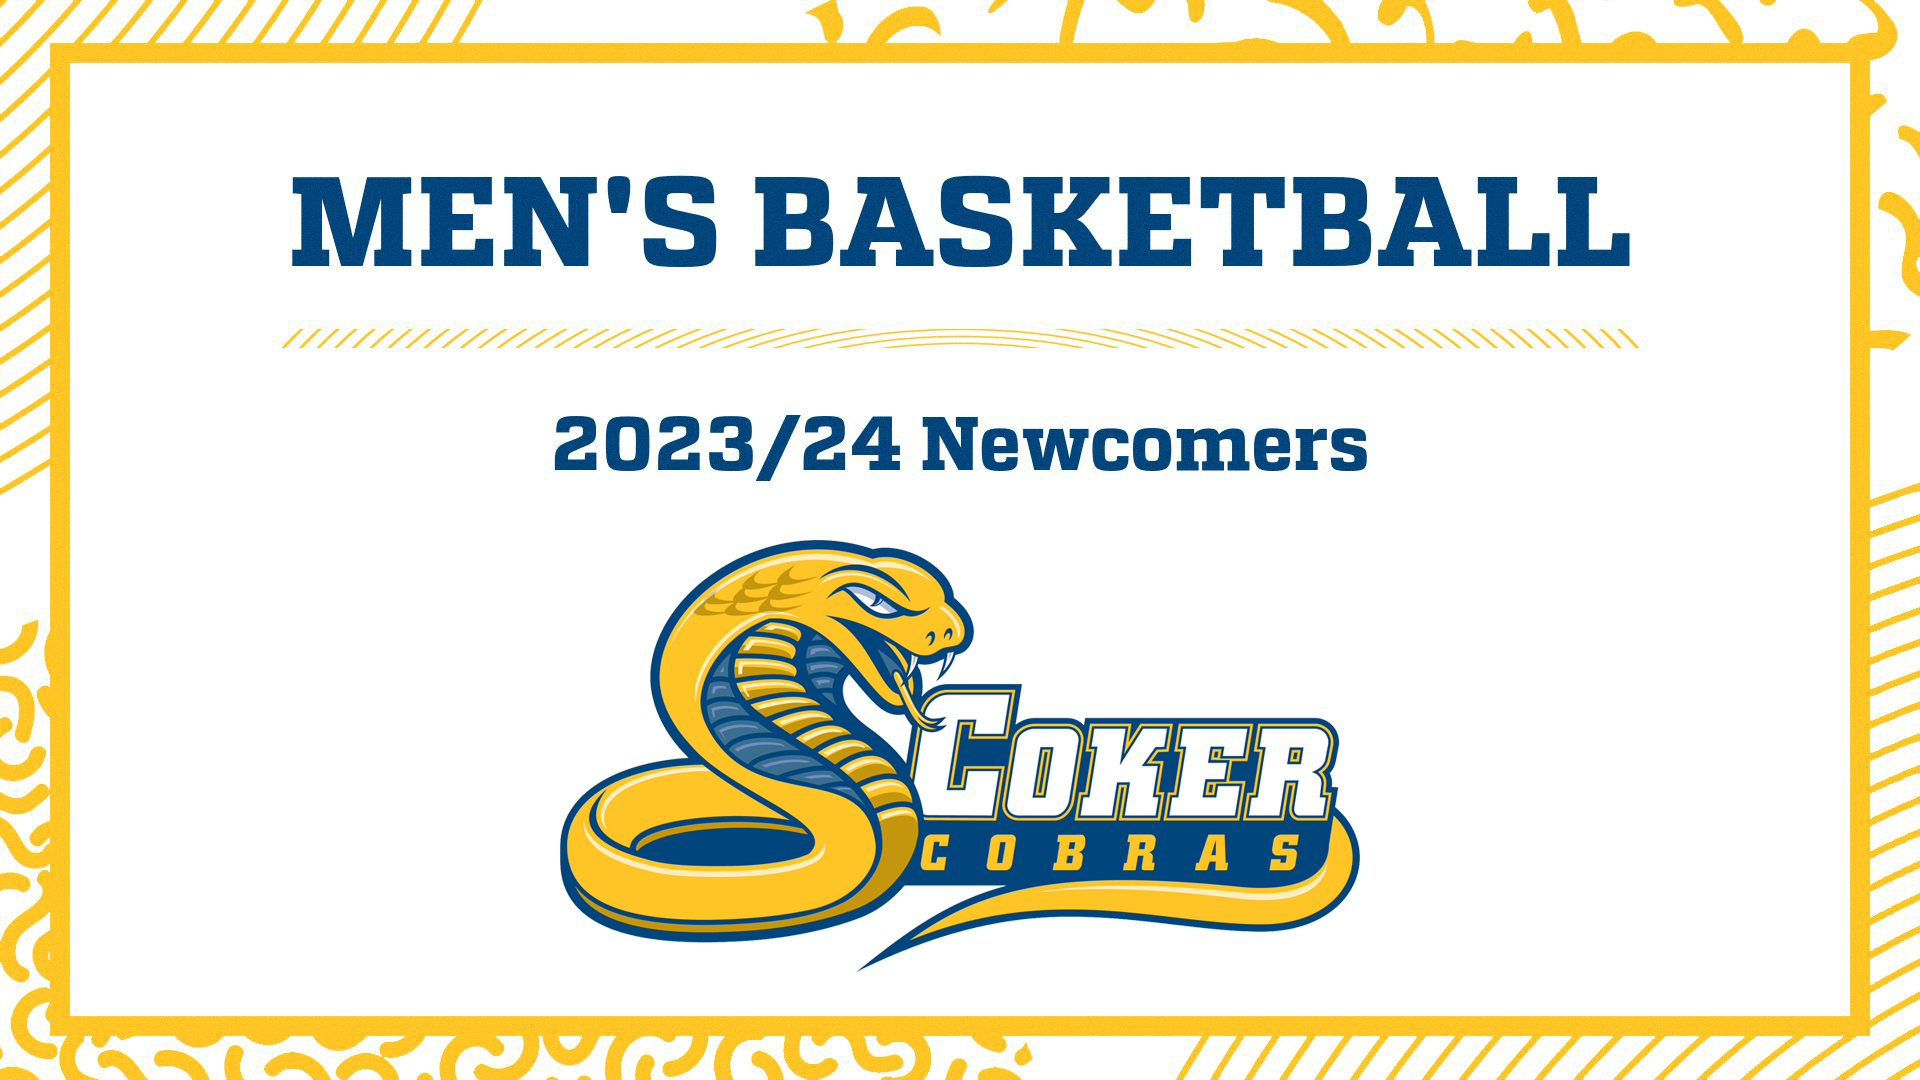 Men's Basketball Announces 2023/24 Newcomers